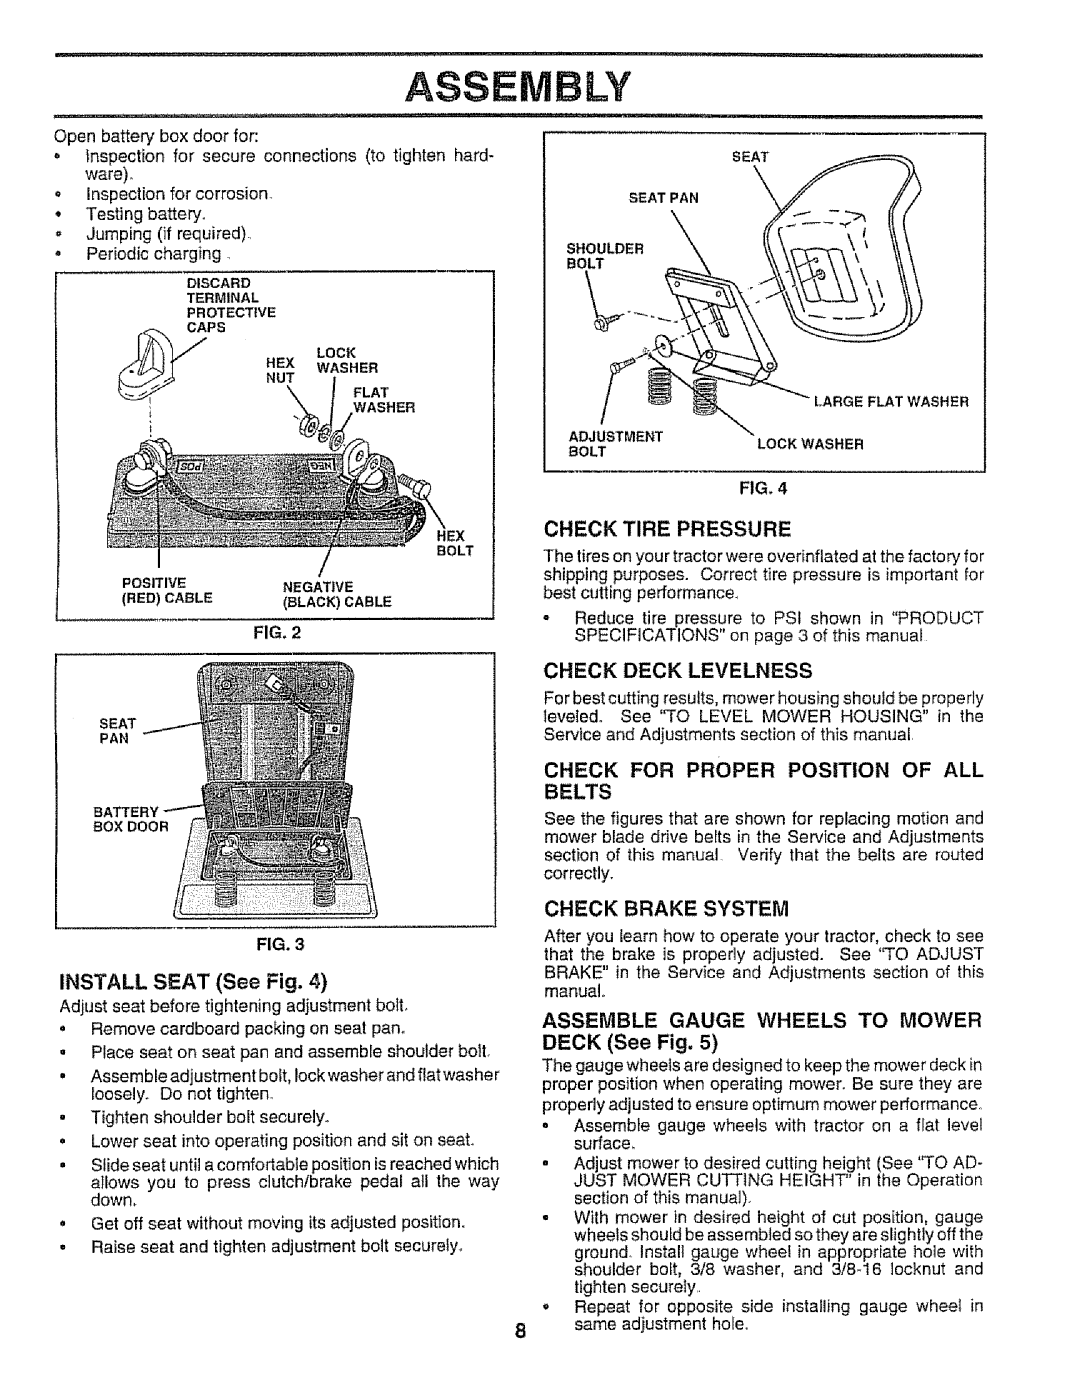 Sears 917.258542 owner manual inspectionfor secureconnectionsto tightenhard, Check Tire Pressure, Check Deck Levelness, Fig 